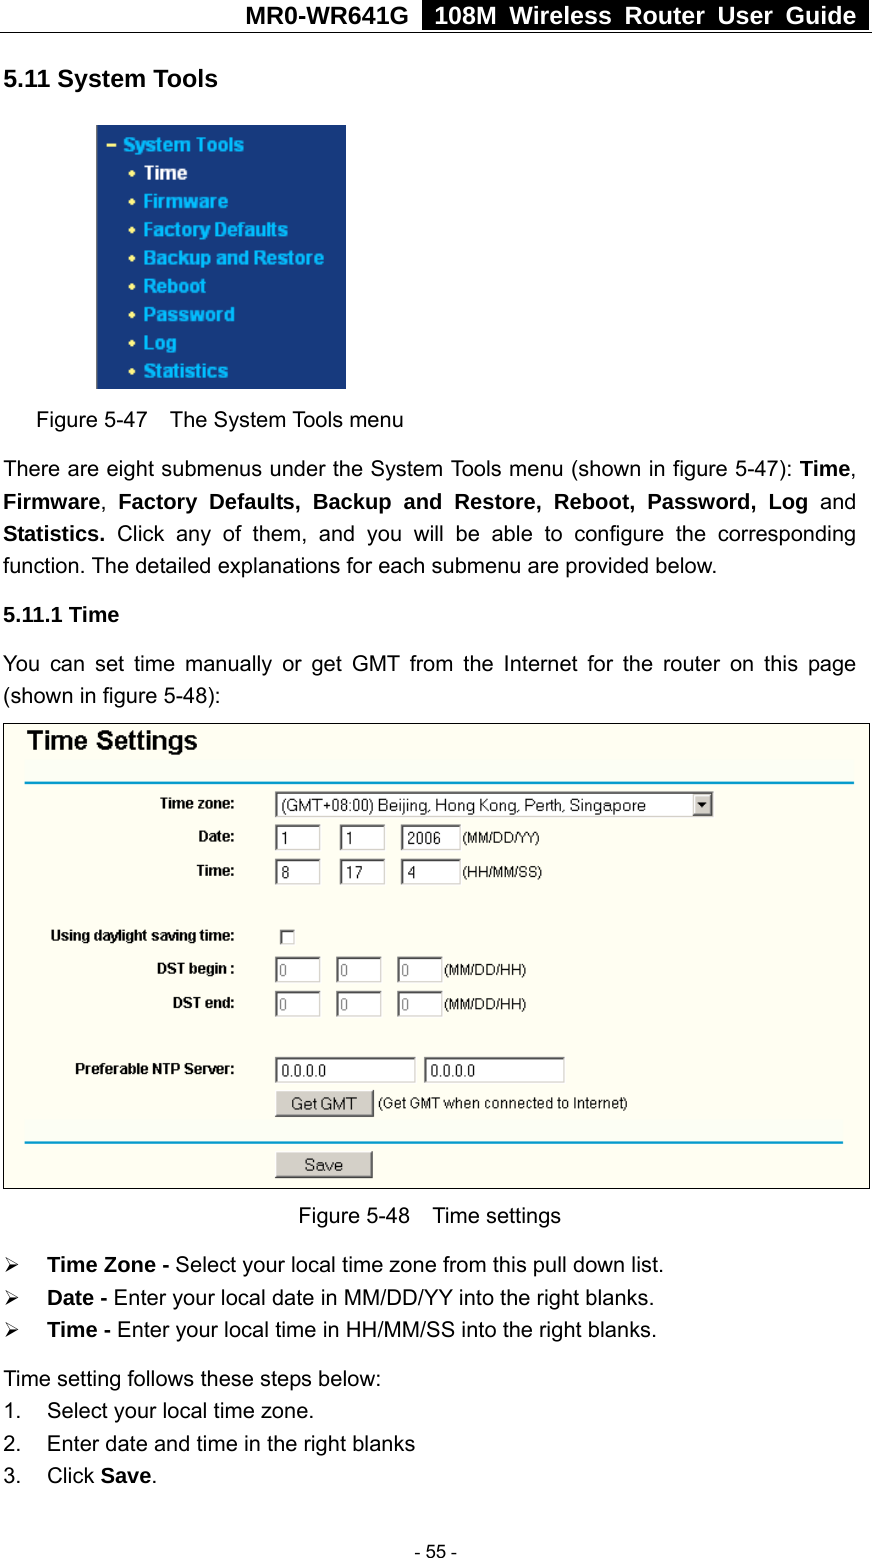 MR0-WR641G   108M Wireless Router User Guide  5.11 System Tools  Figure 5-47  The System Tools menu There are eight submenus under the System Tools menu (shown in figure 5-47): Time, Firmware,  Factory Defaults, Backup and Restore, Reboot, Password, Log and Statistics.  Click any of them, and you will be able to configure the corresponding function. The detailed explanations for each submenu are provided below. 5.11.1 Time You can set time manually or get GMT from the Internet for the router on this page (shown in figure 5-48):  Figure 5-48  Time settings ¾ Time Zone - Select your local time zone from this pull down list. ¾ Date - Enter your local date in MM/DD/YY into the right blanks. ¾ Time - Enter your local time in HH/MM/SS into the right blanks. Time setting follows these steps below: 1.  Select your local time zone. 2.  Enter date and time in the right blanks 3. Click Save.  - 55 - 